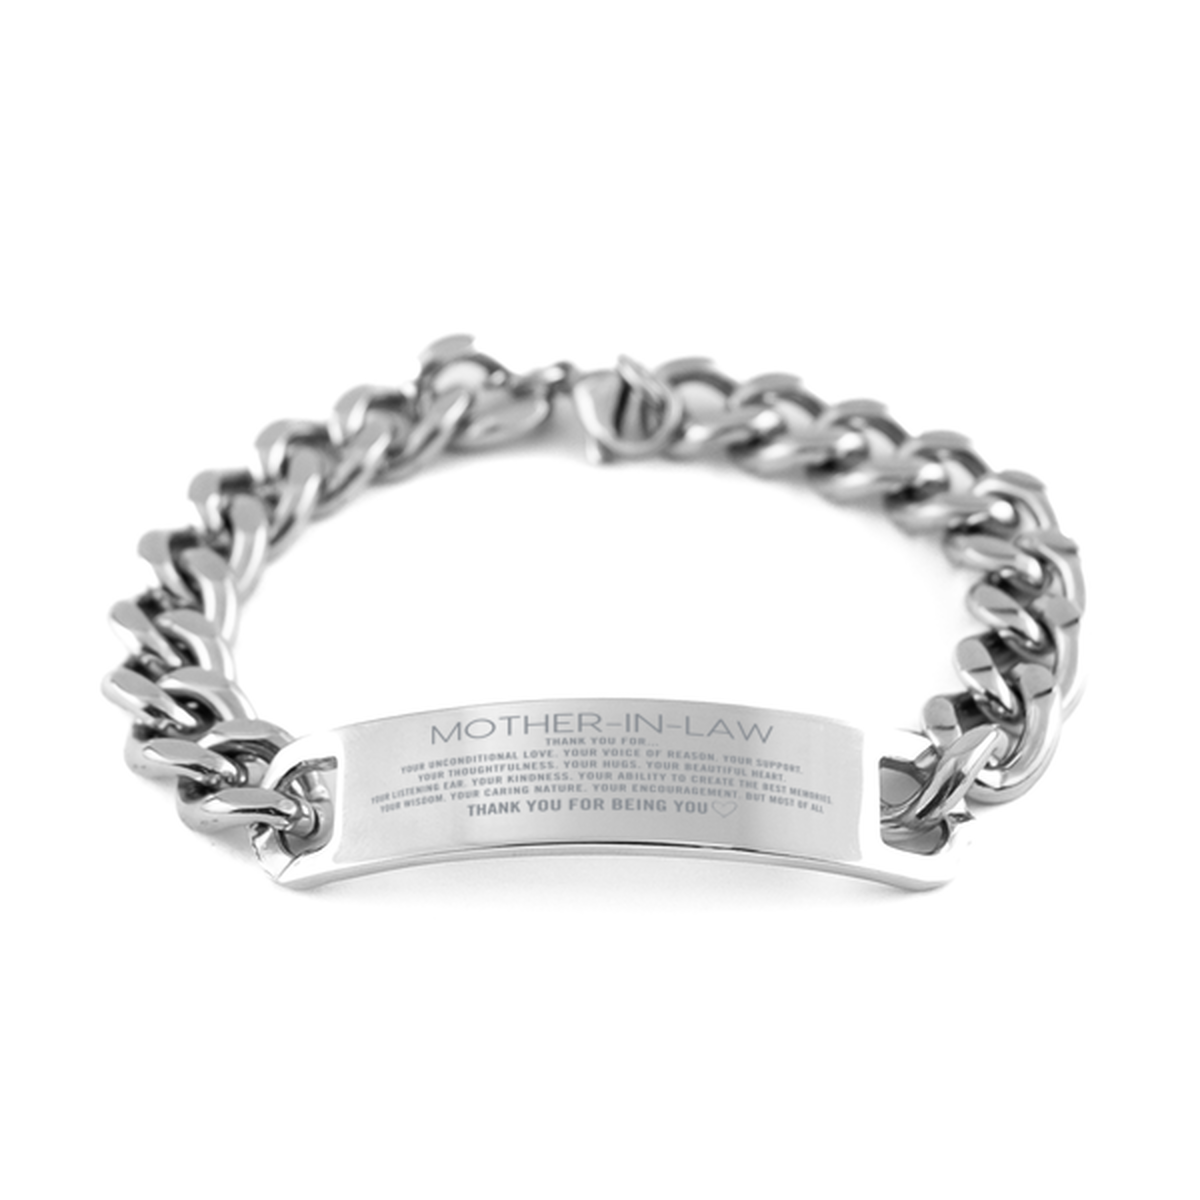 Mother-In-Law Cuban Chain Stainless Steel Bracelet Custom, Engraved Gifts For Mother-In-Law Christmas Graduation Birthday Gifts for Men Women Mother-In-Law Thank you for Your unconditional love